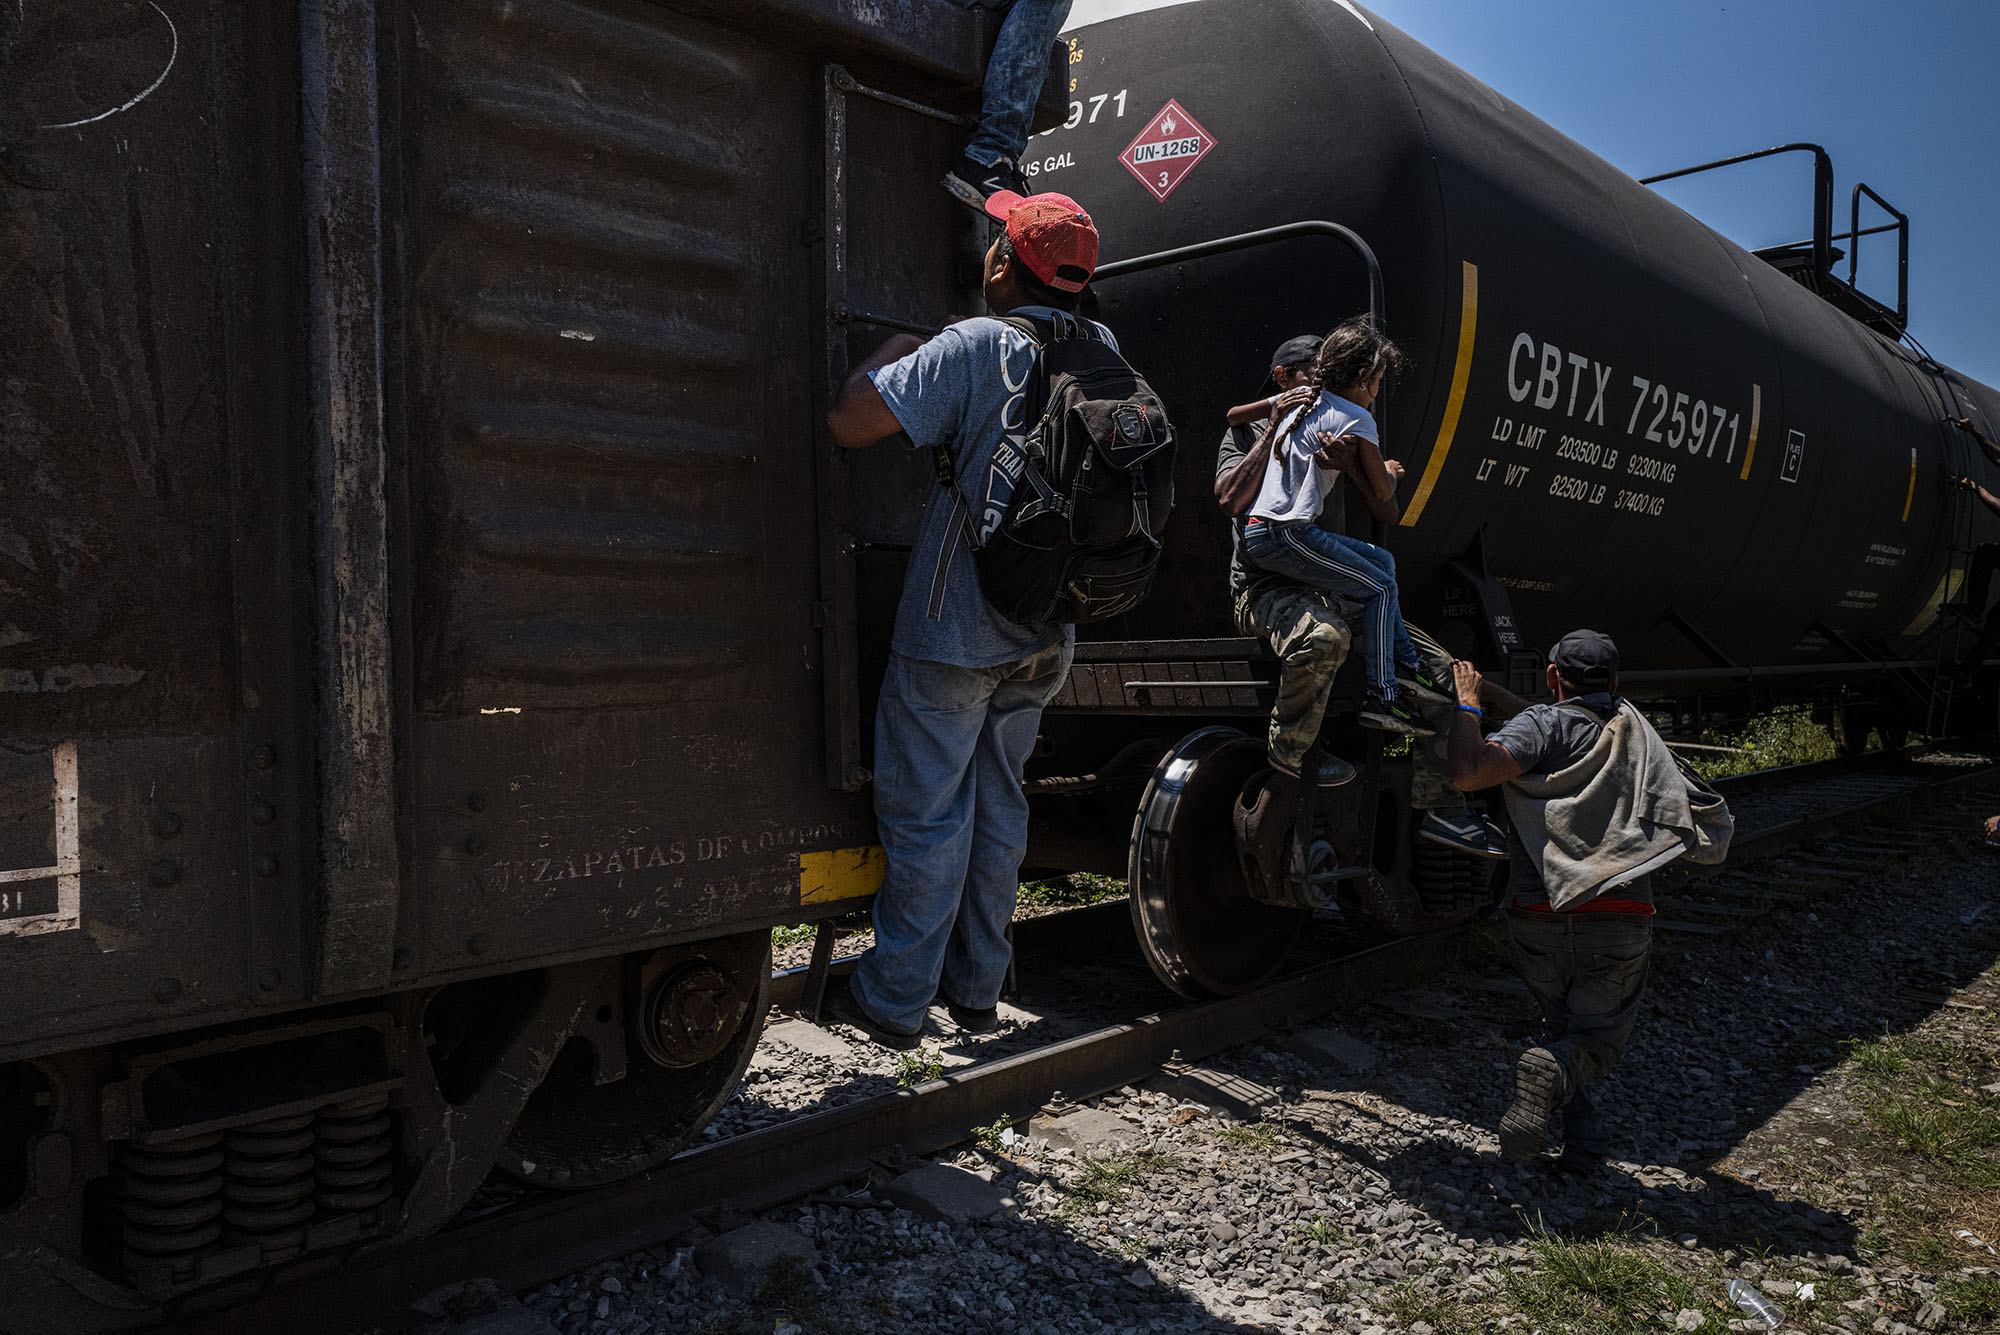 A father helps his daughter climb aboard the train in Coatzacoalcos.